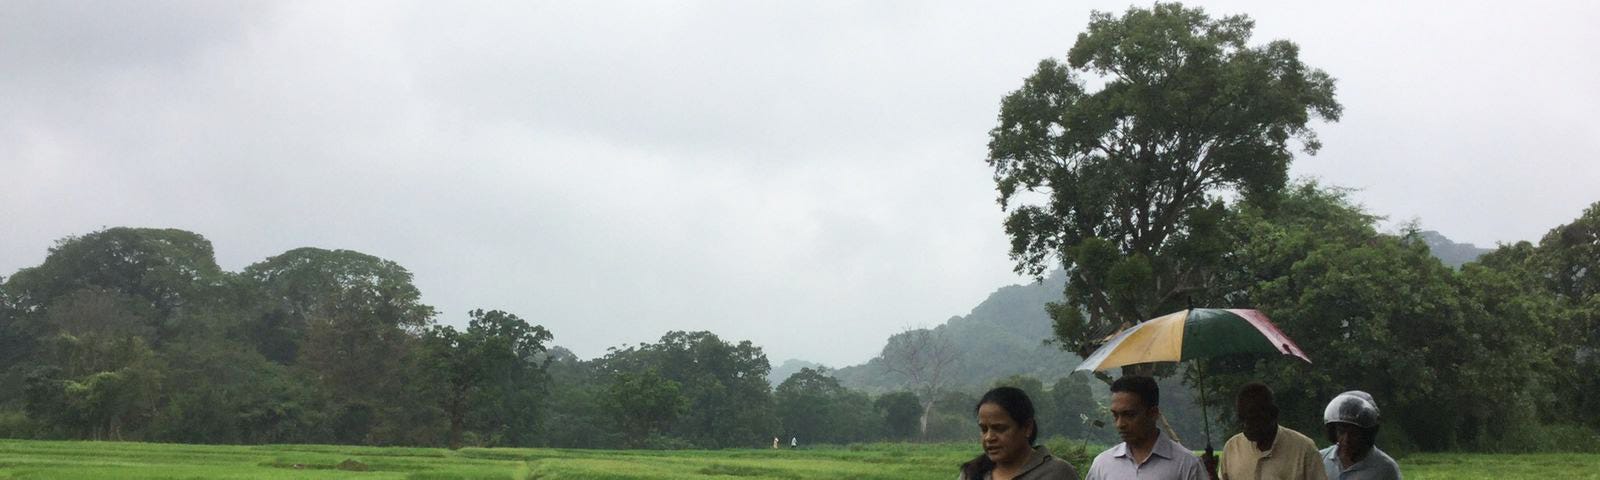 A woman walks along a narrow path along a verdant green field with three people following closely behind her and one holding an umbrella.